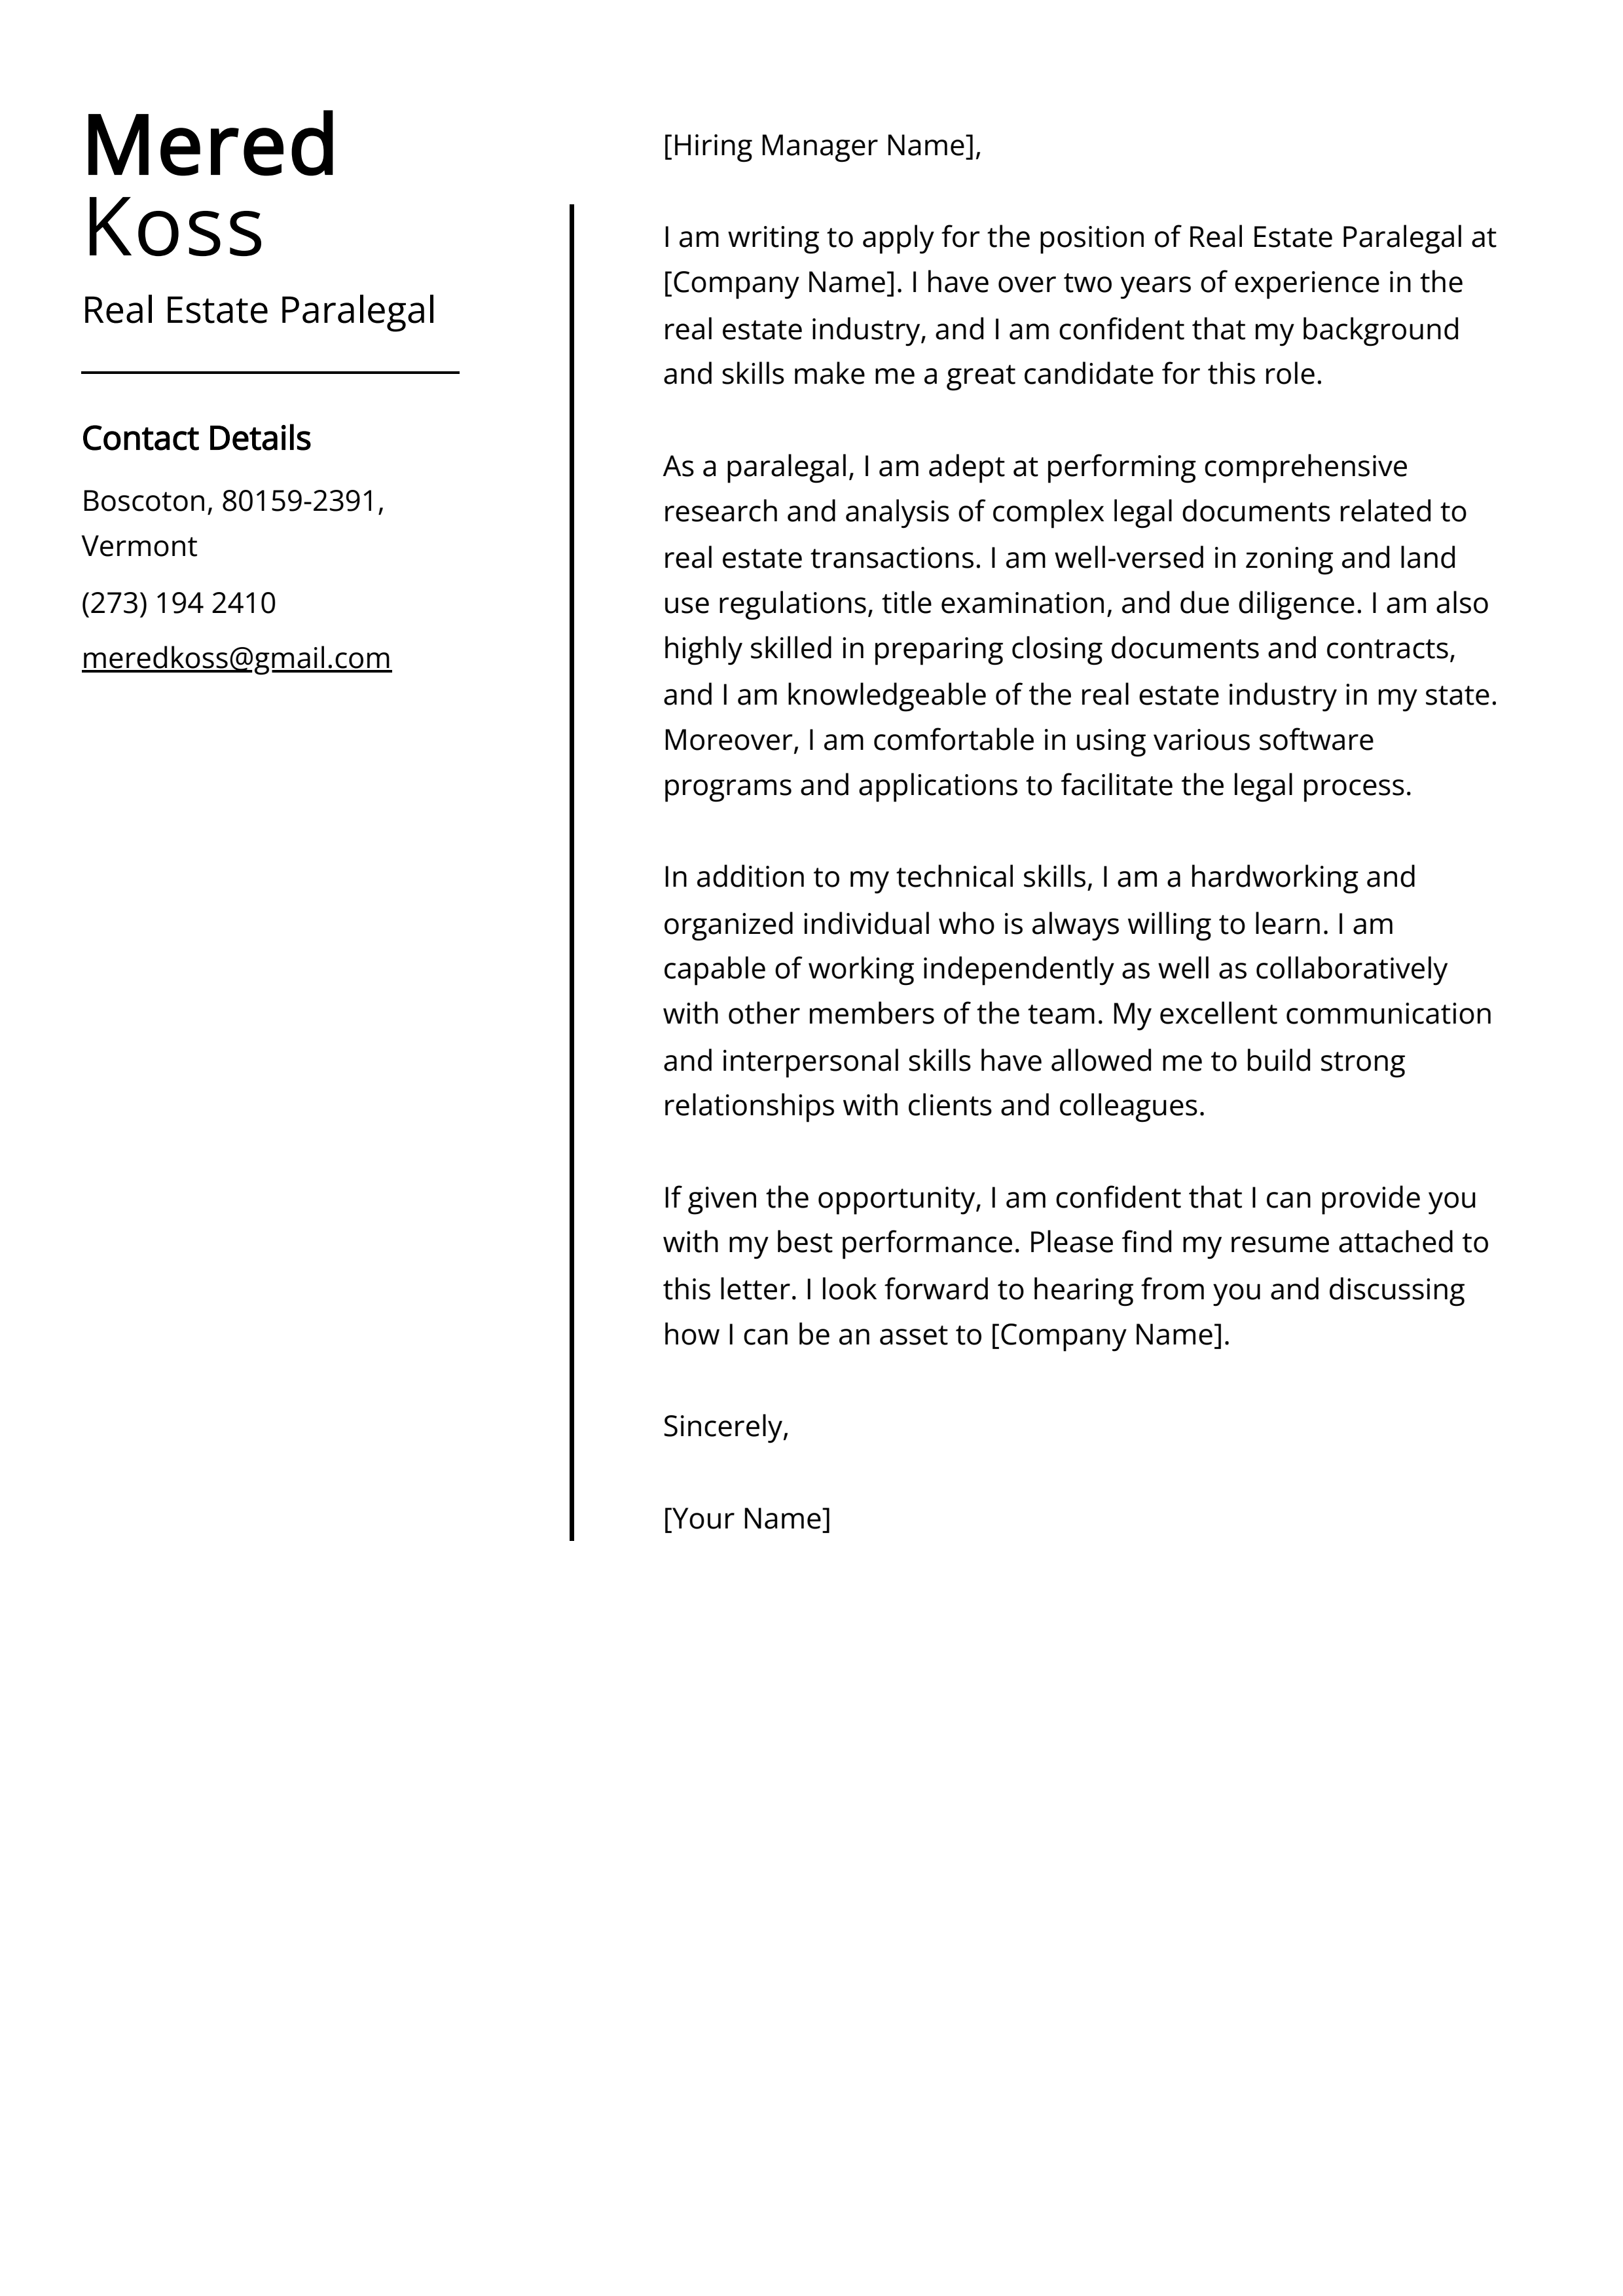 Real Estate Paralegal Cover Letter Example